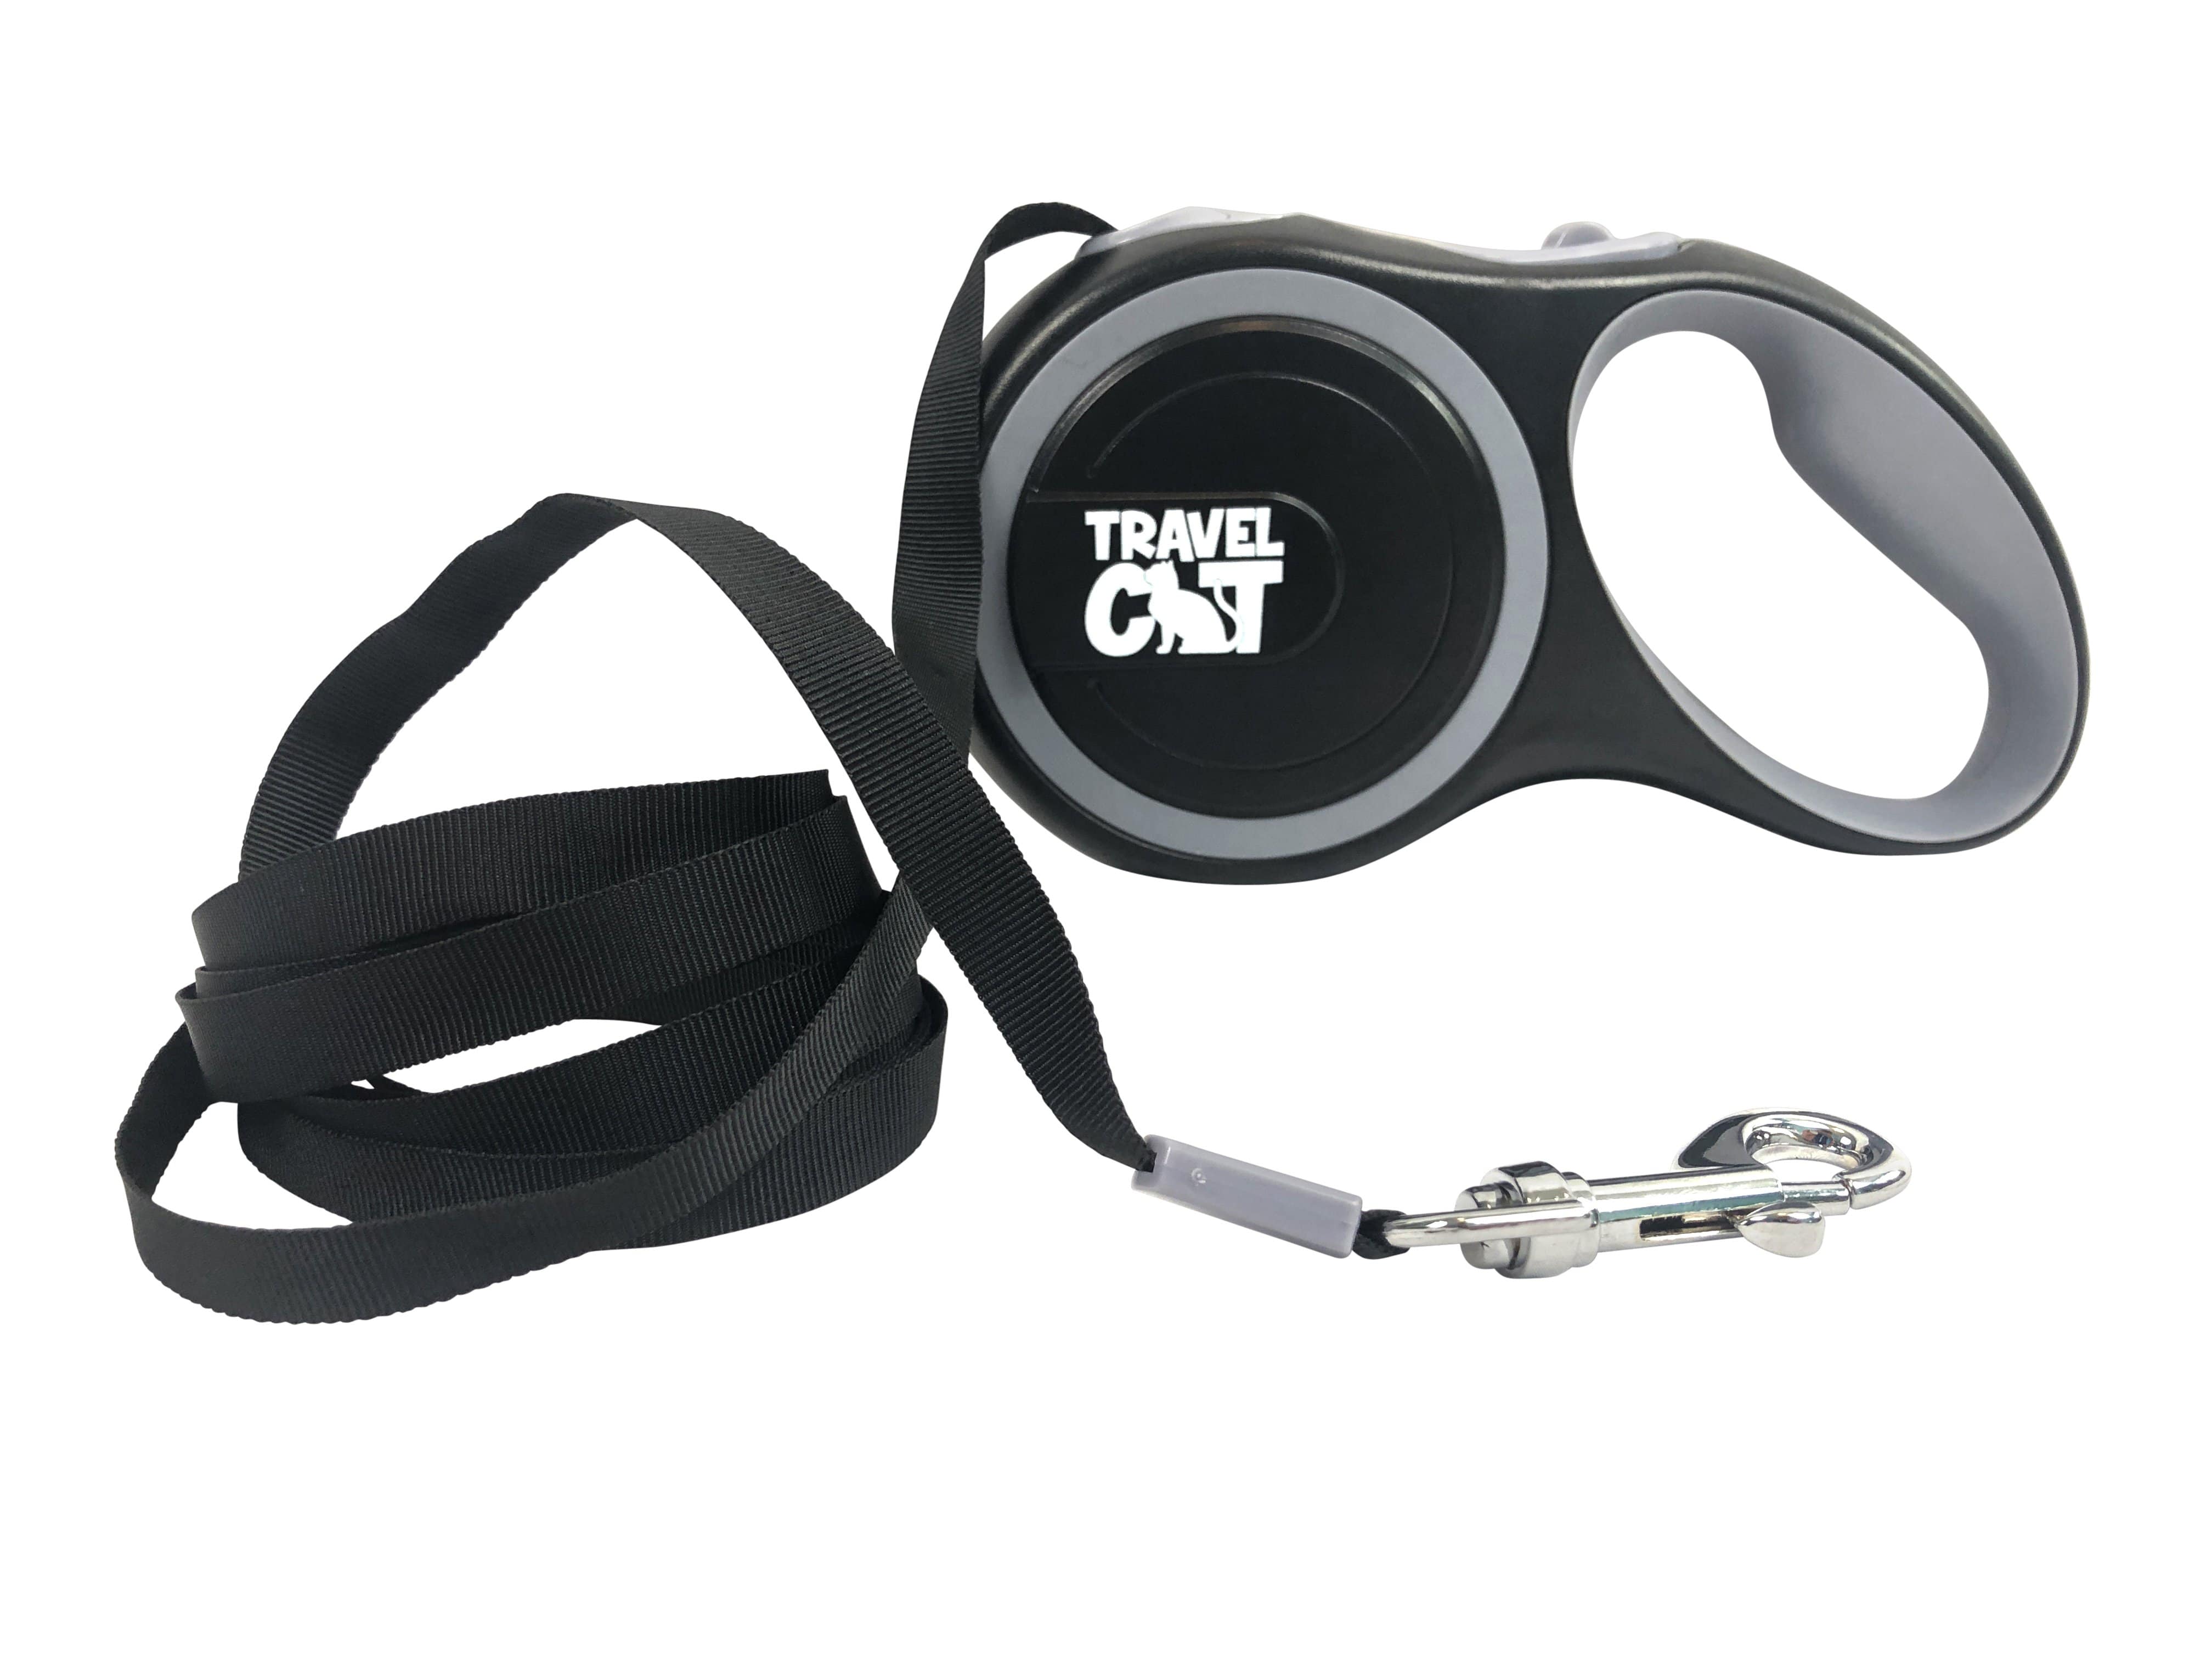 "The Wind in My Whiskers" Bundle: Harness, Leash, and Retractable Leash